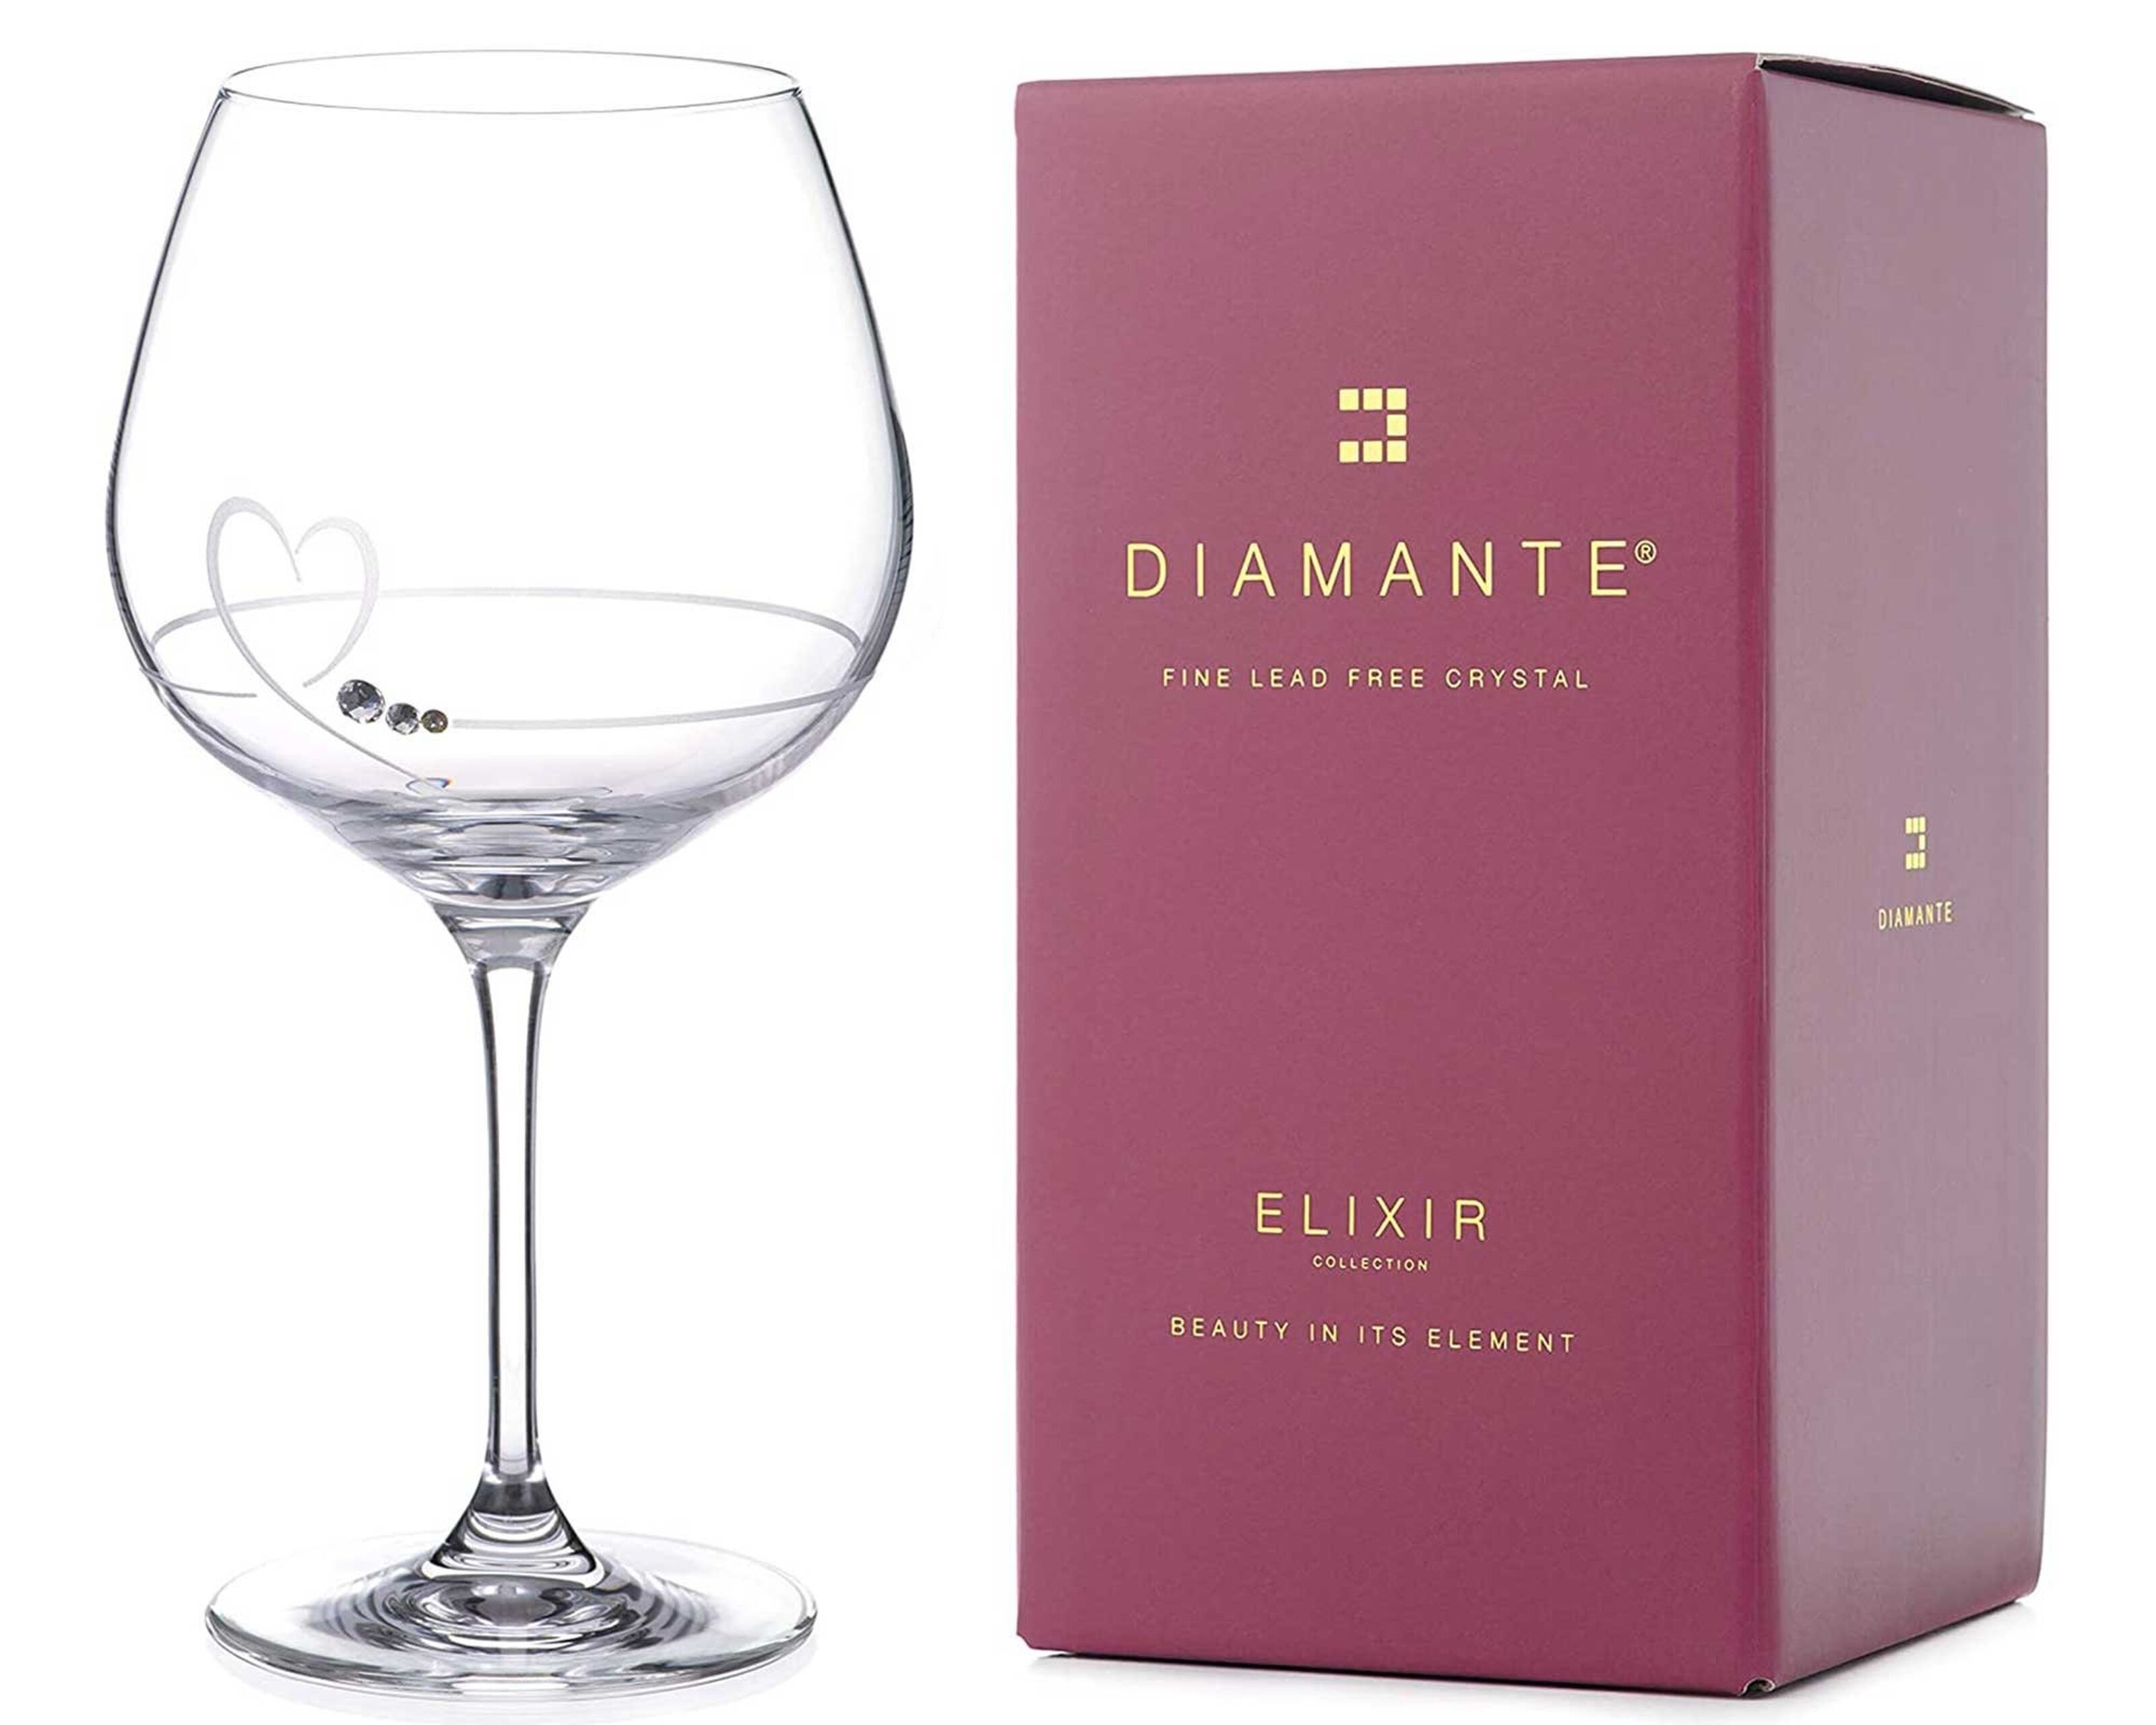 Diamante Wine Glass & Bottle Gift Set by Forever Crystal